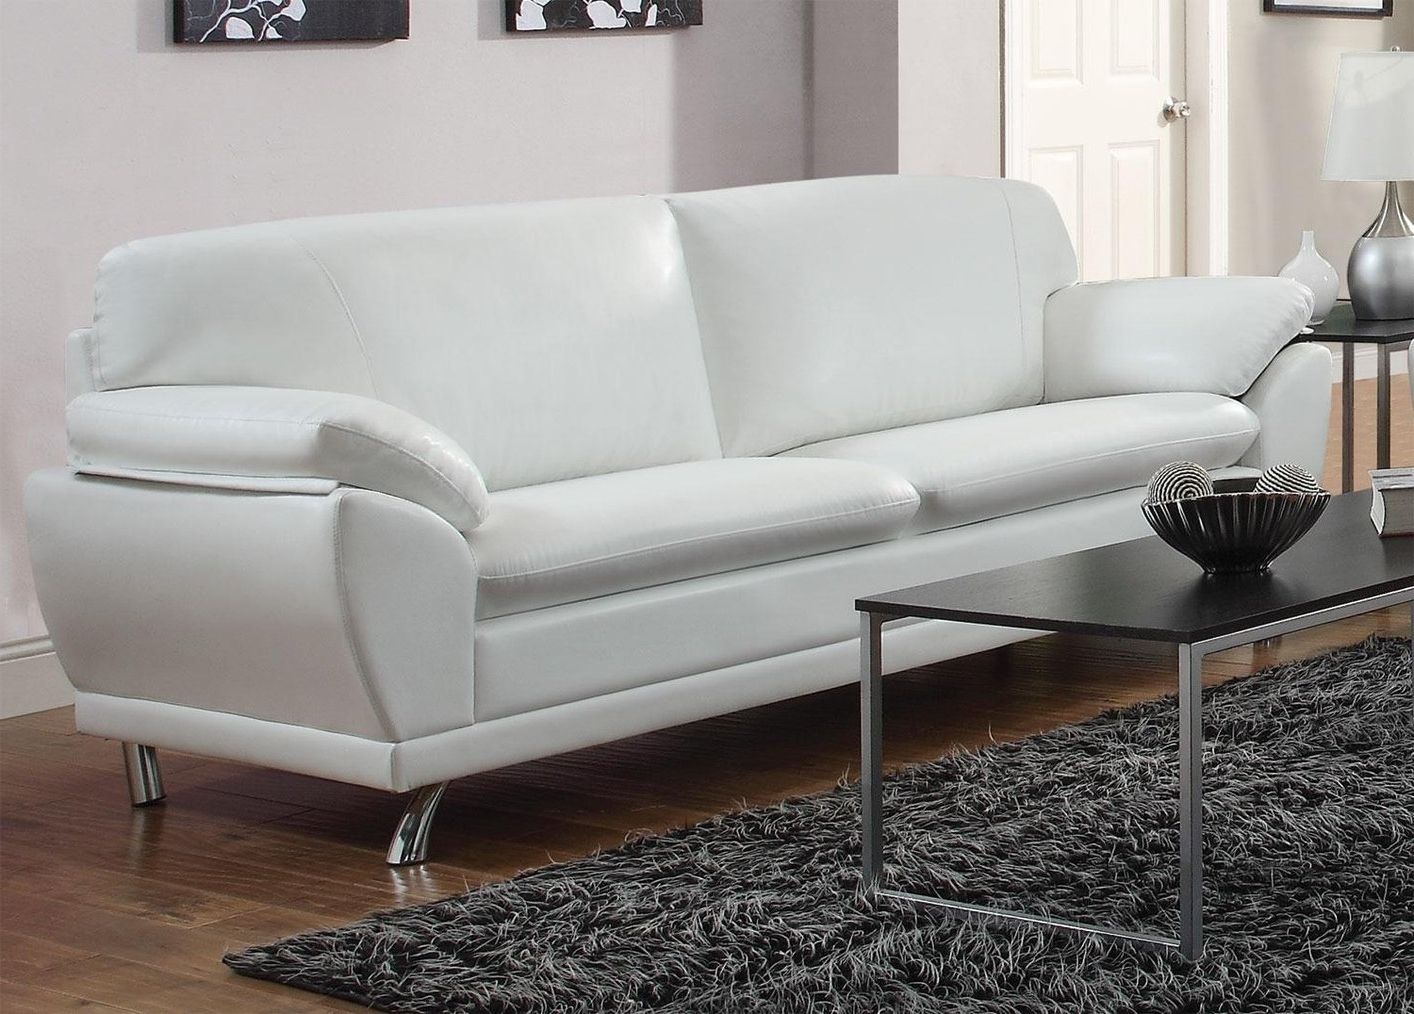 Decorating Small White Leather Chair Off White Leather Sofa And For Most Recently Released Off White Leather Sofas (View 18 of 20)